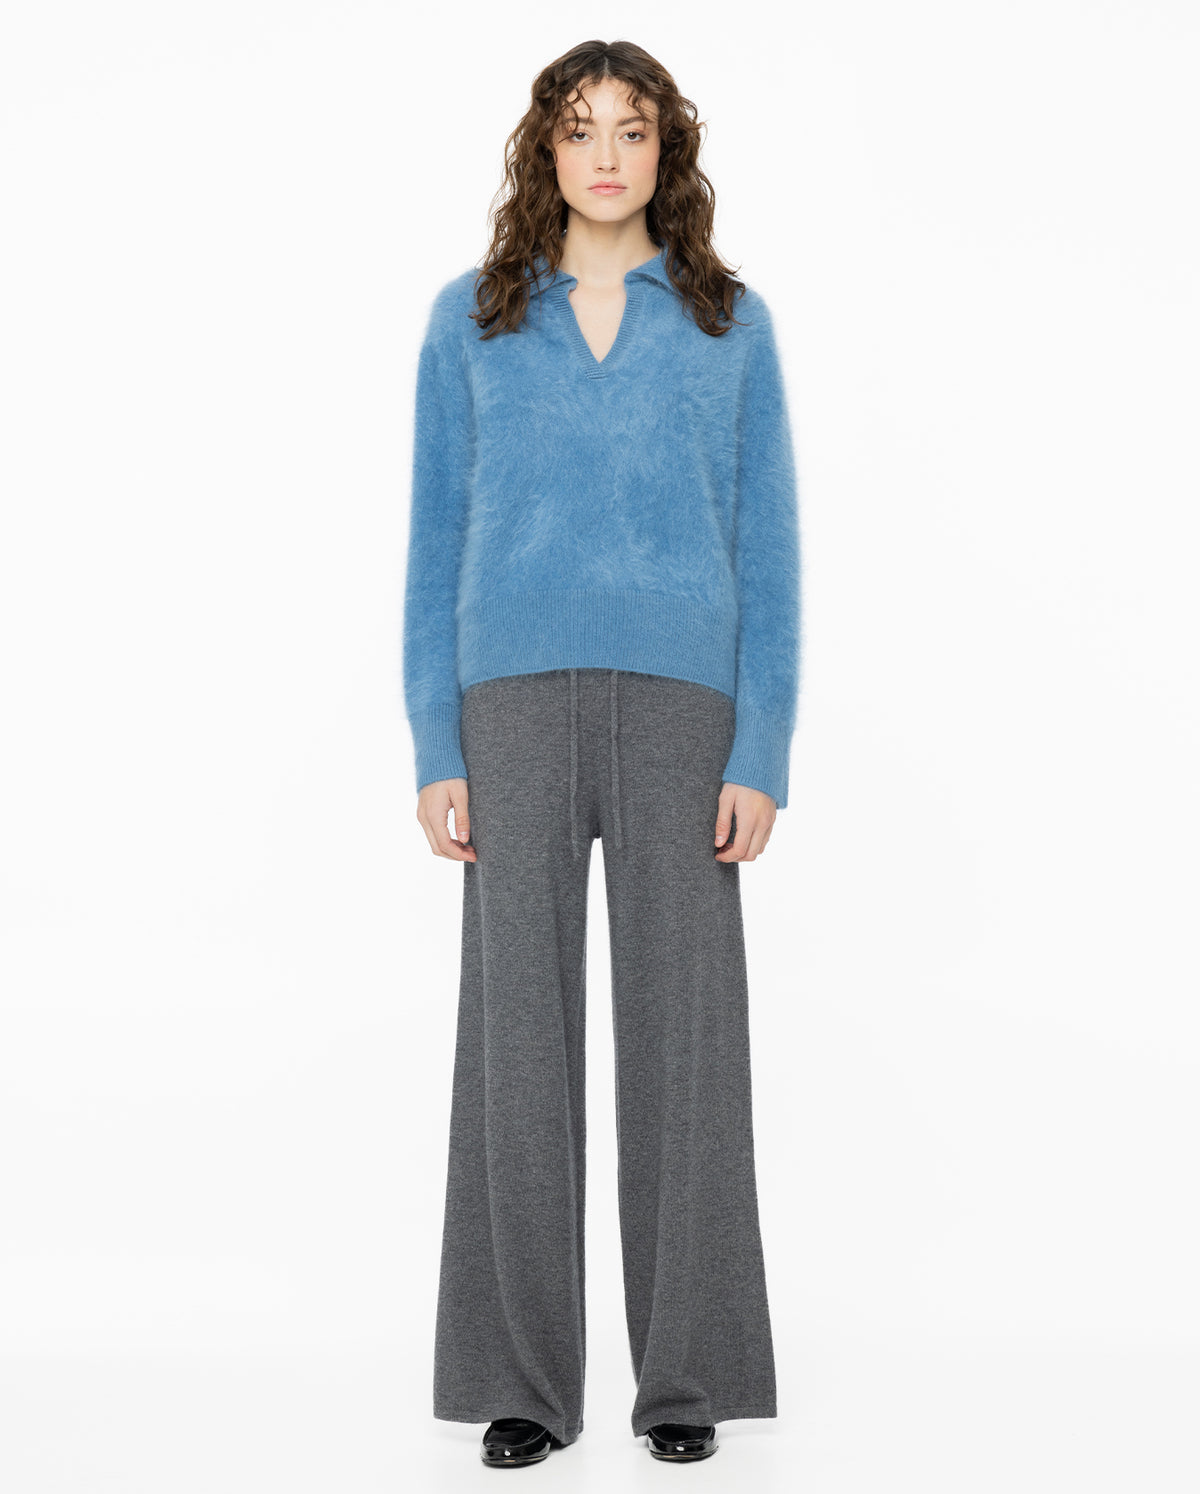 Kerry Sweater - Stormy Blue Brushed